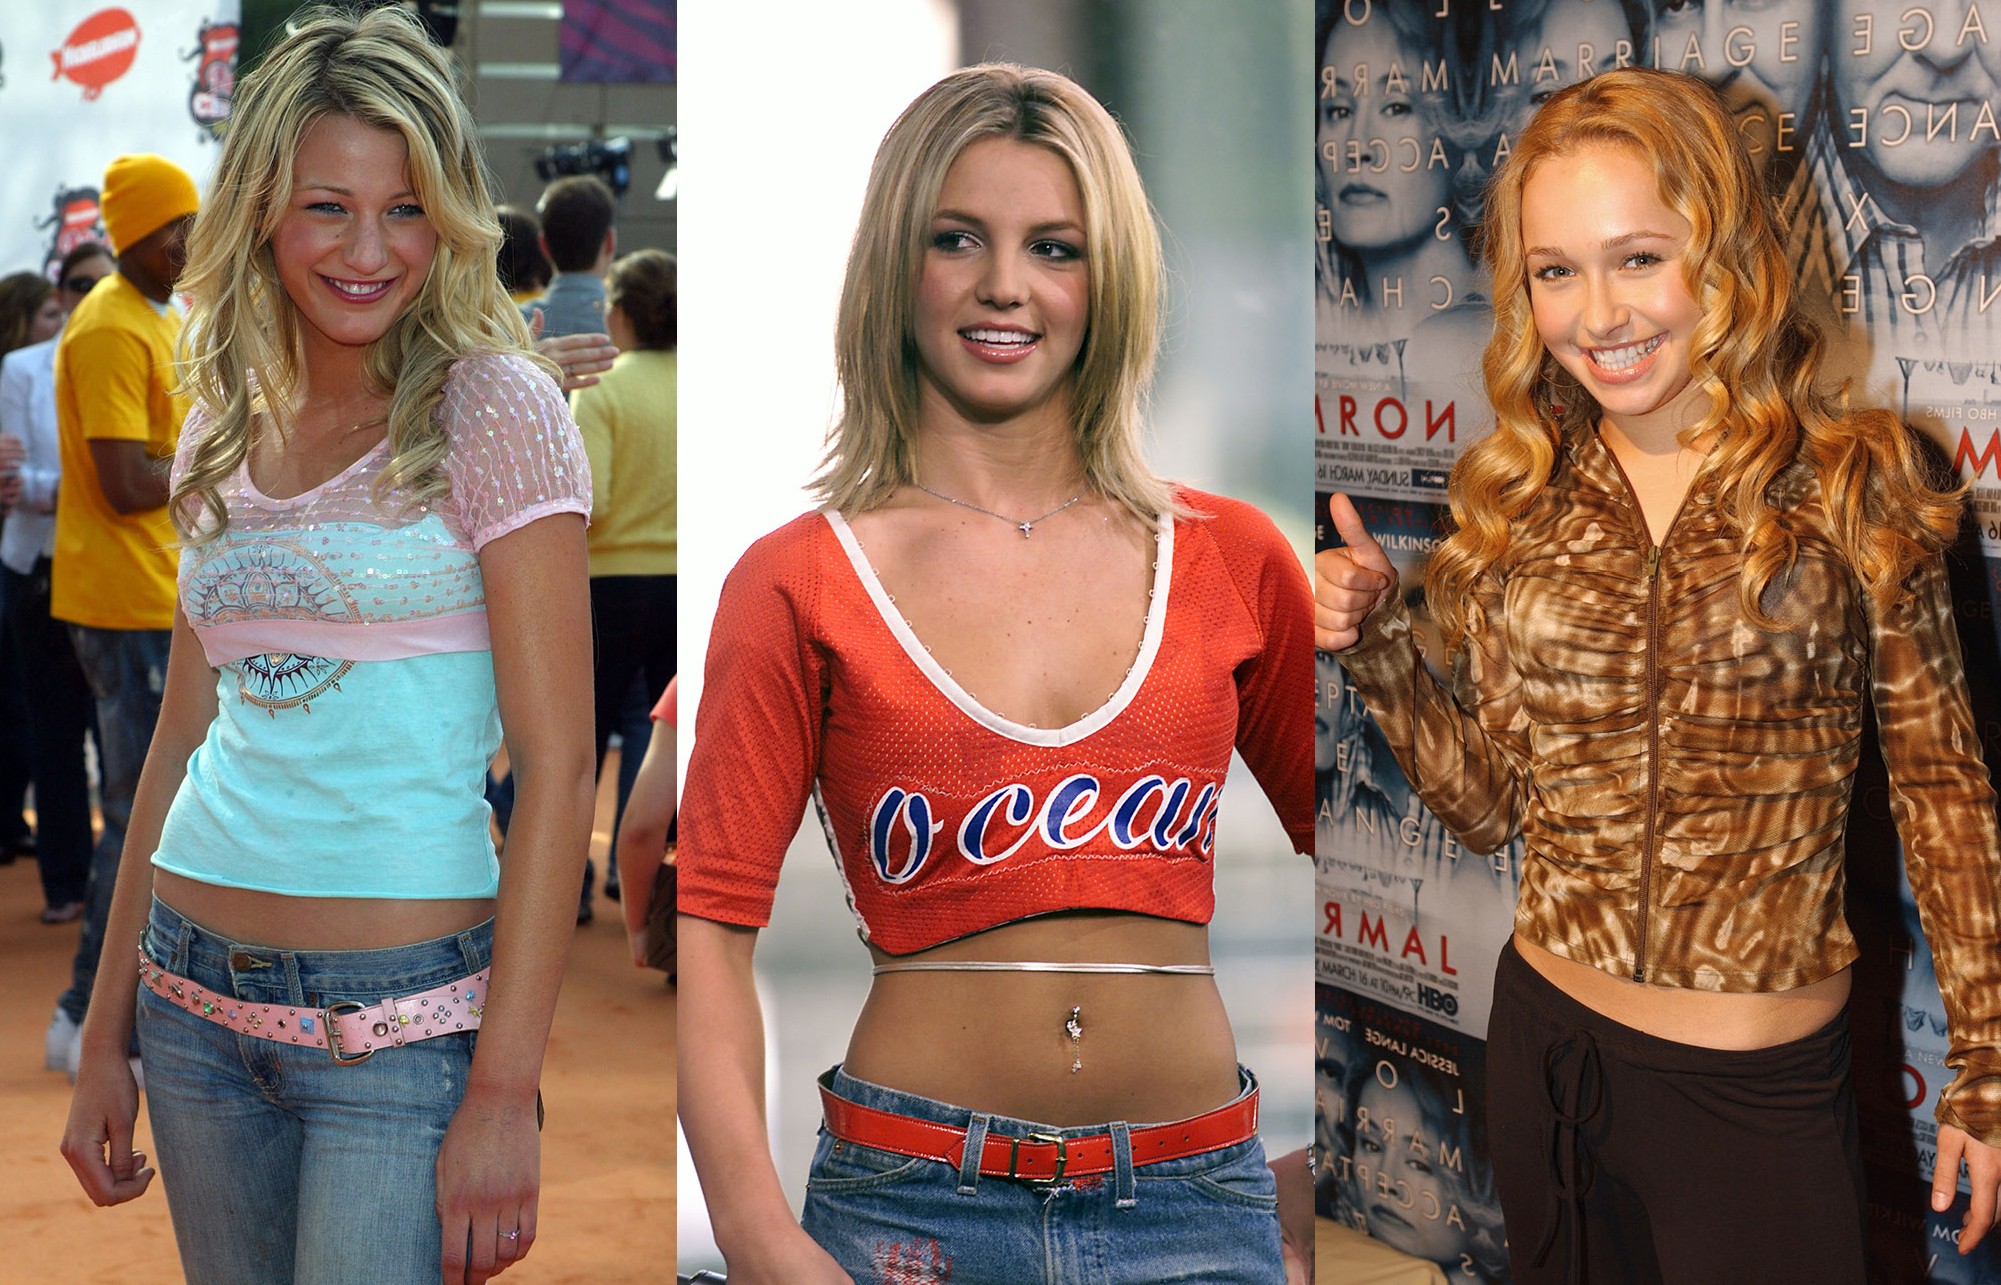 Blake Lively, Britney Spears e Hayden Panettiere no início dos anos 2000 (Foto: Getty Images)